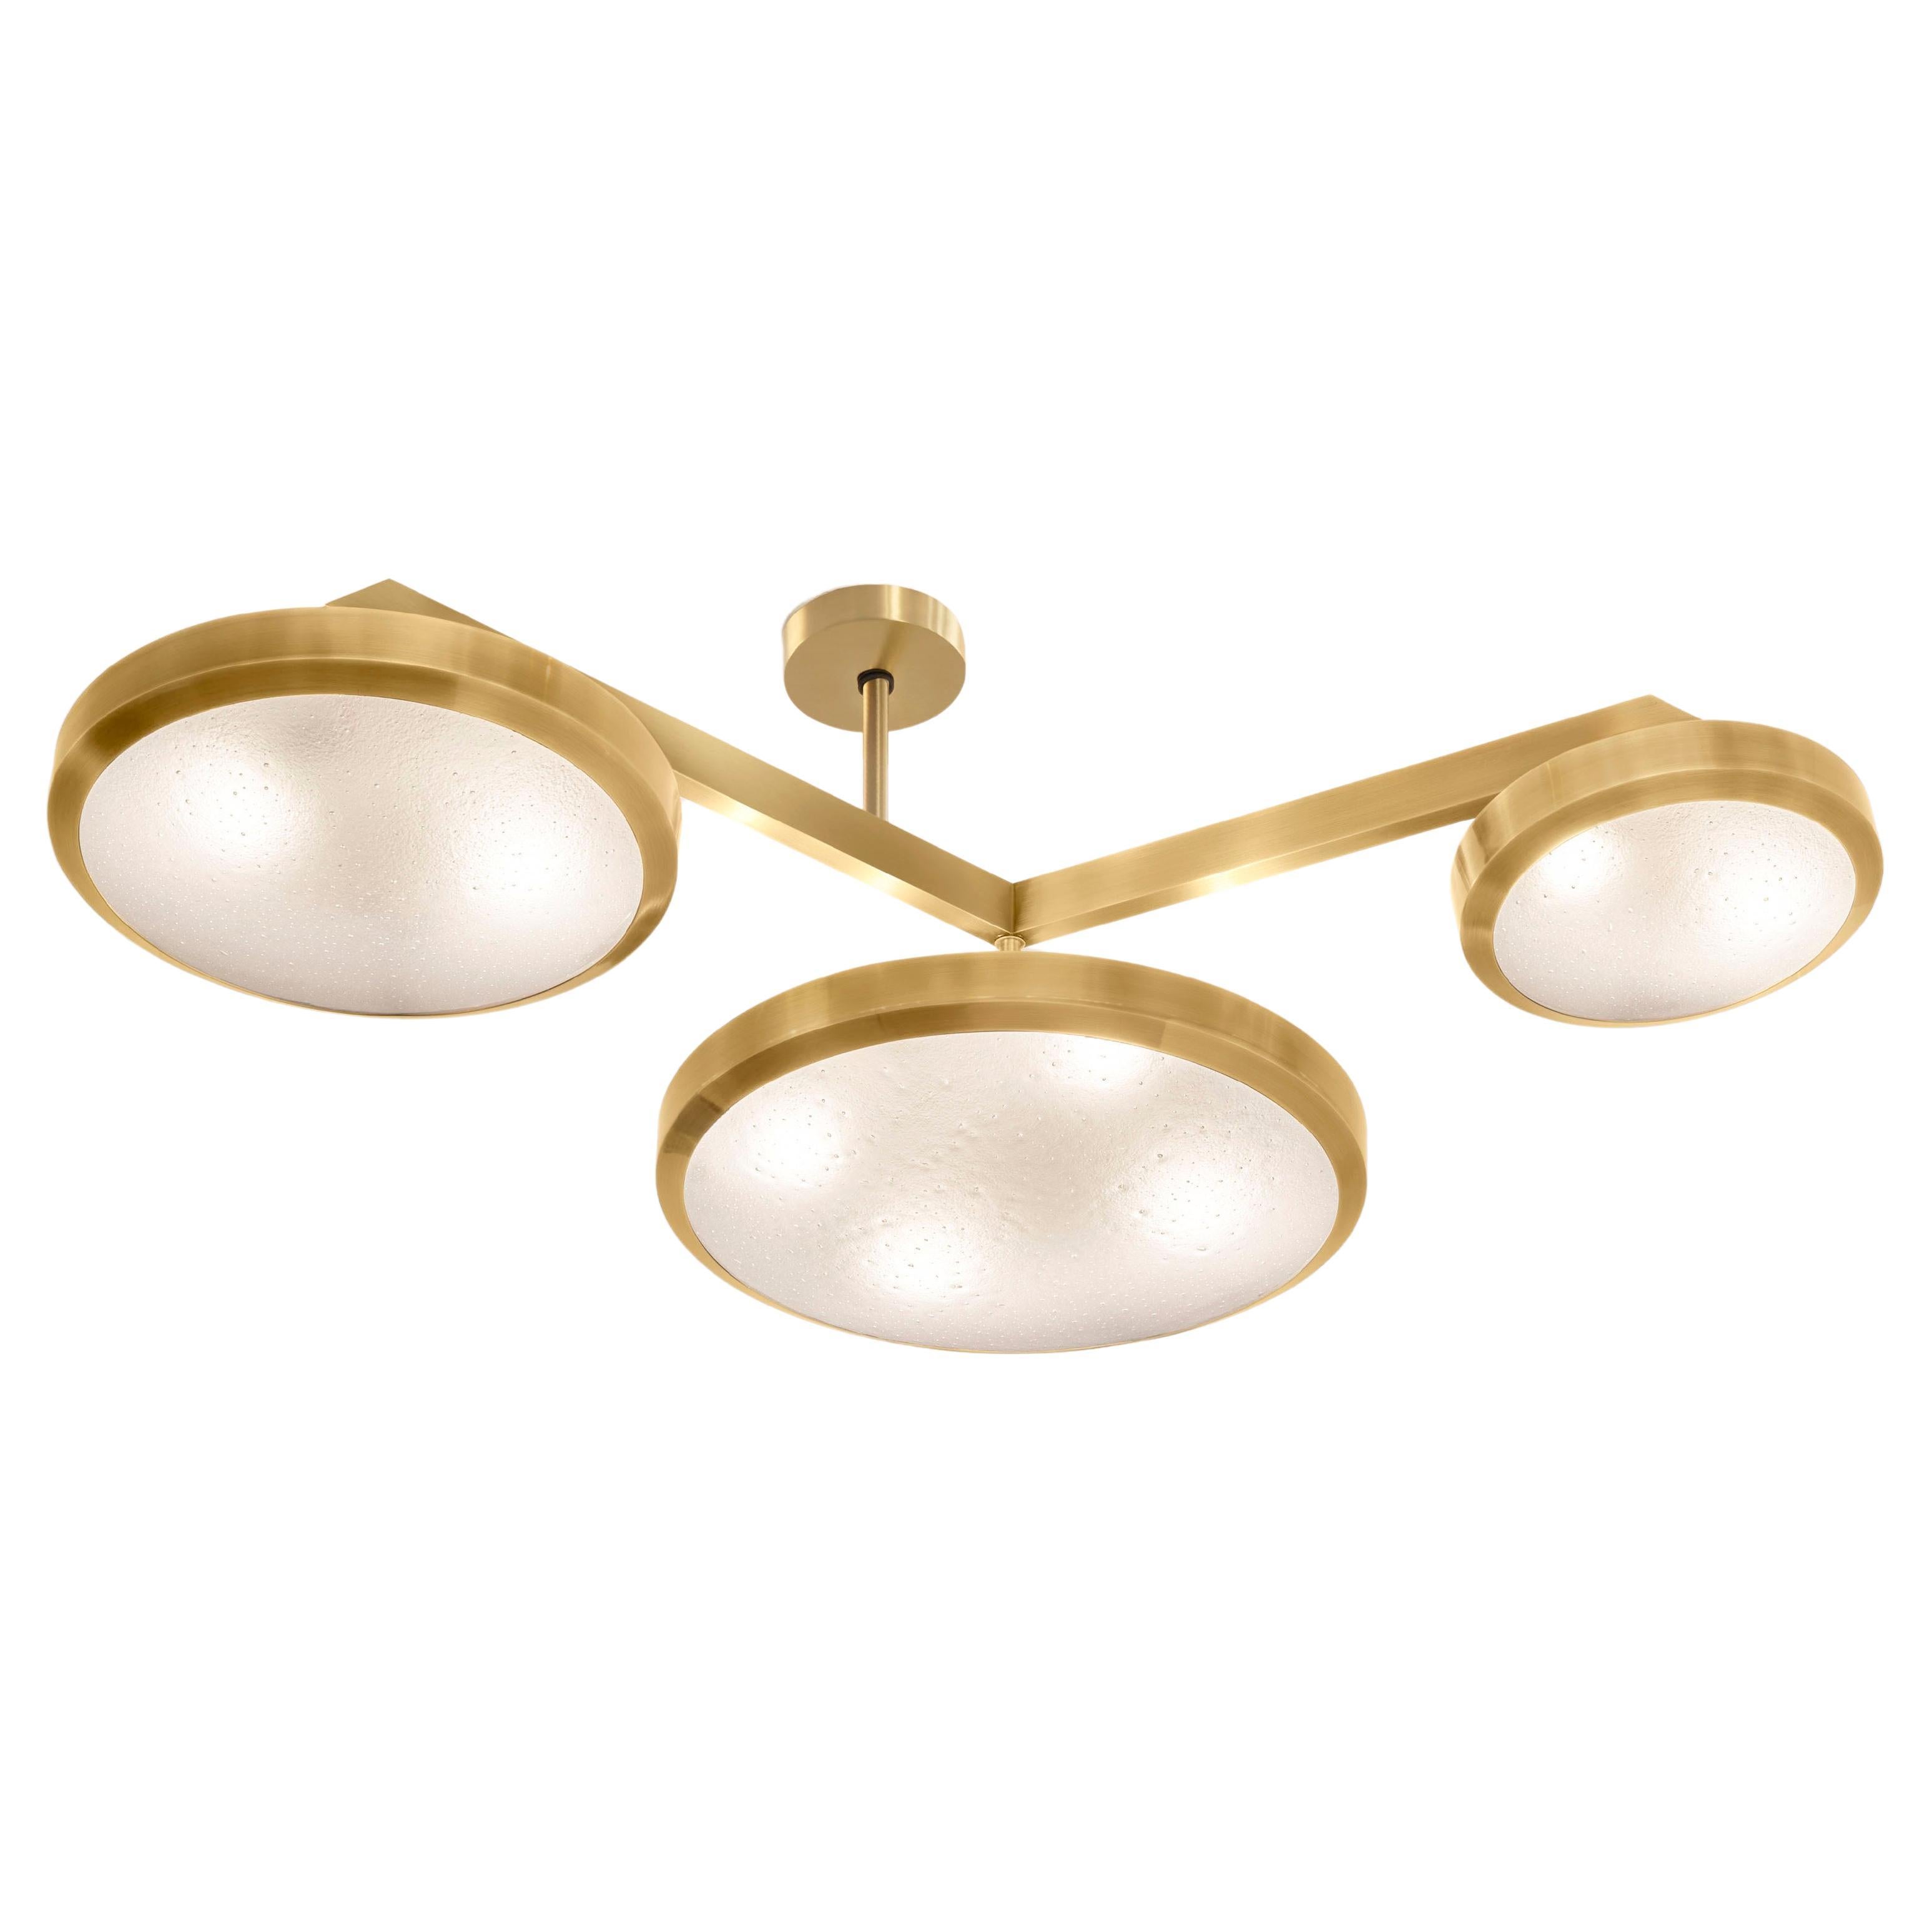 Zeta Ceiling Light by Gaspare Asaro - Satin Brass Finish For Sale